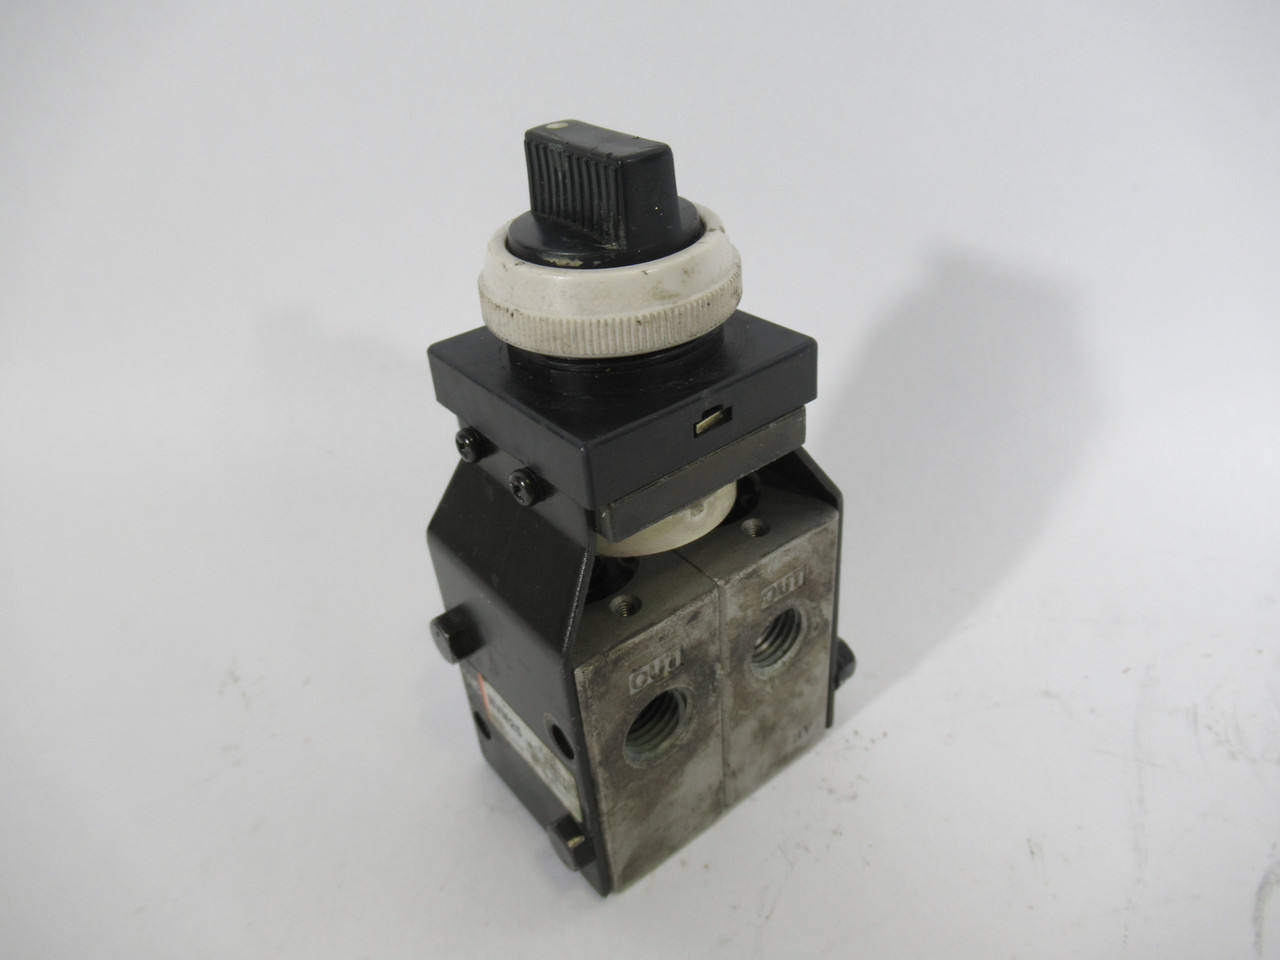 SMC NVM250-N02-34B Old Style Manual Actuator Valve 1/4"NPT 3Position USED